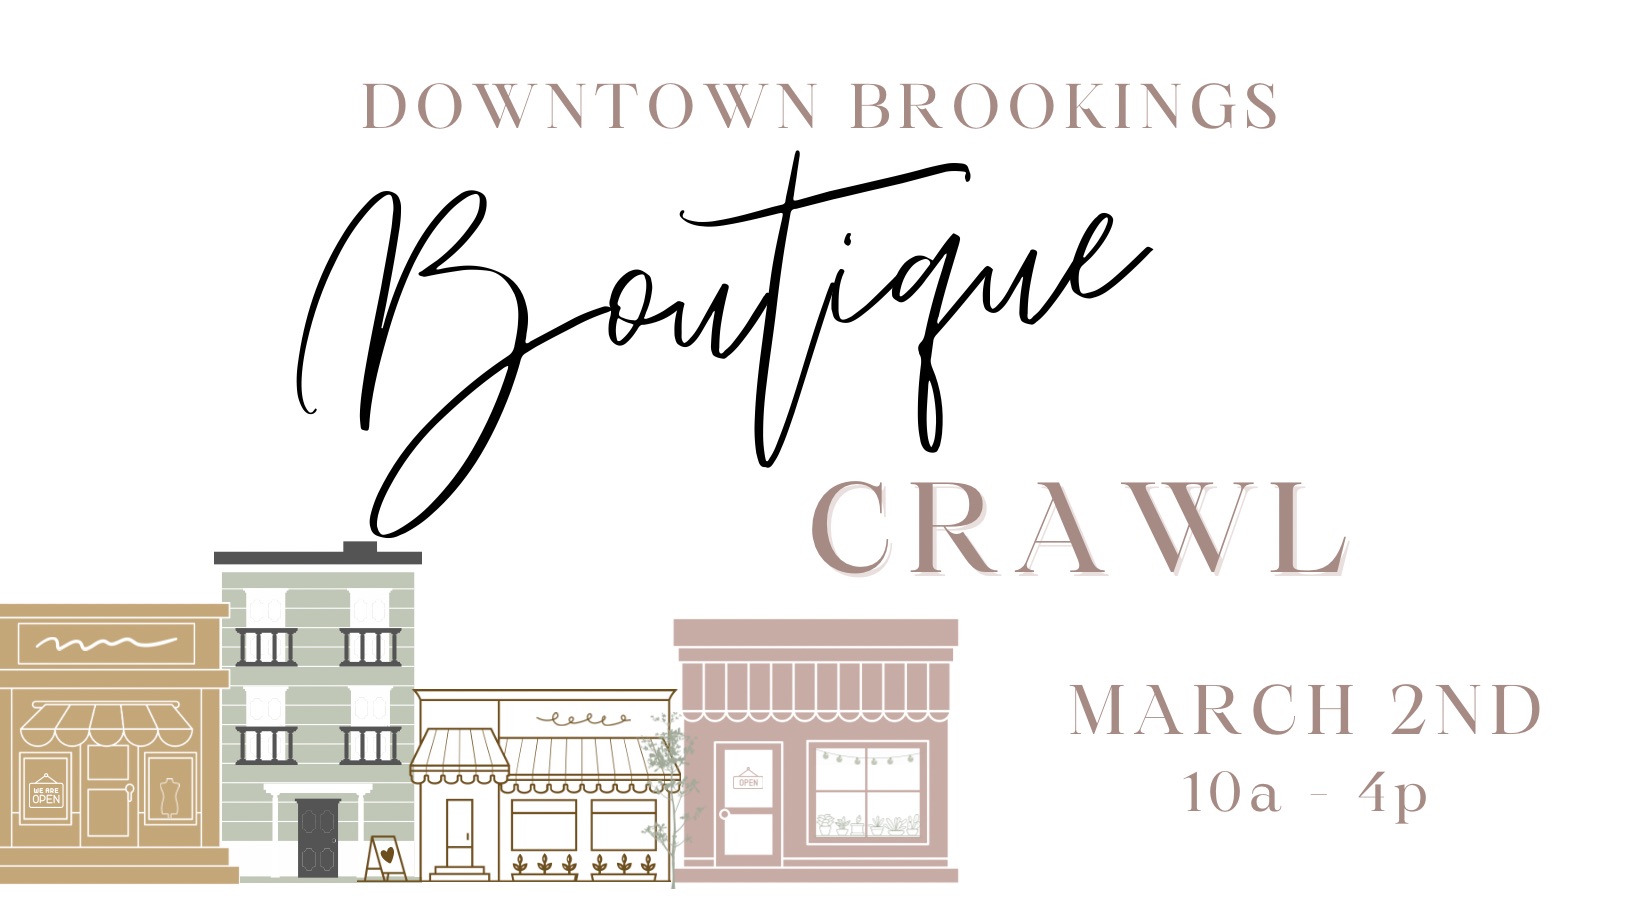 Text reads "Downtown Brookings Boutique Crawl March 2nd 10am to 4pm". Image includes 4 colorful storefronts lined up next to each other.